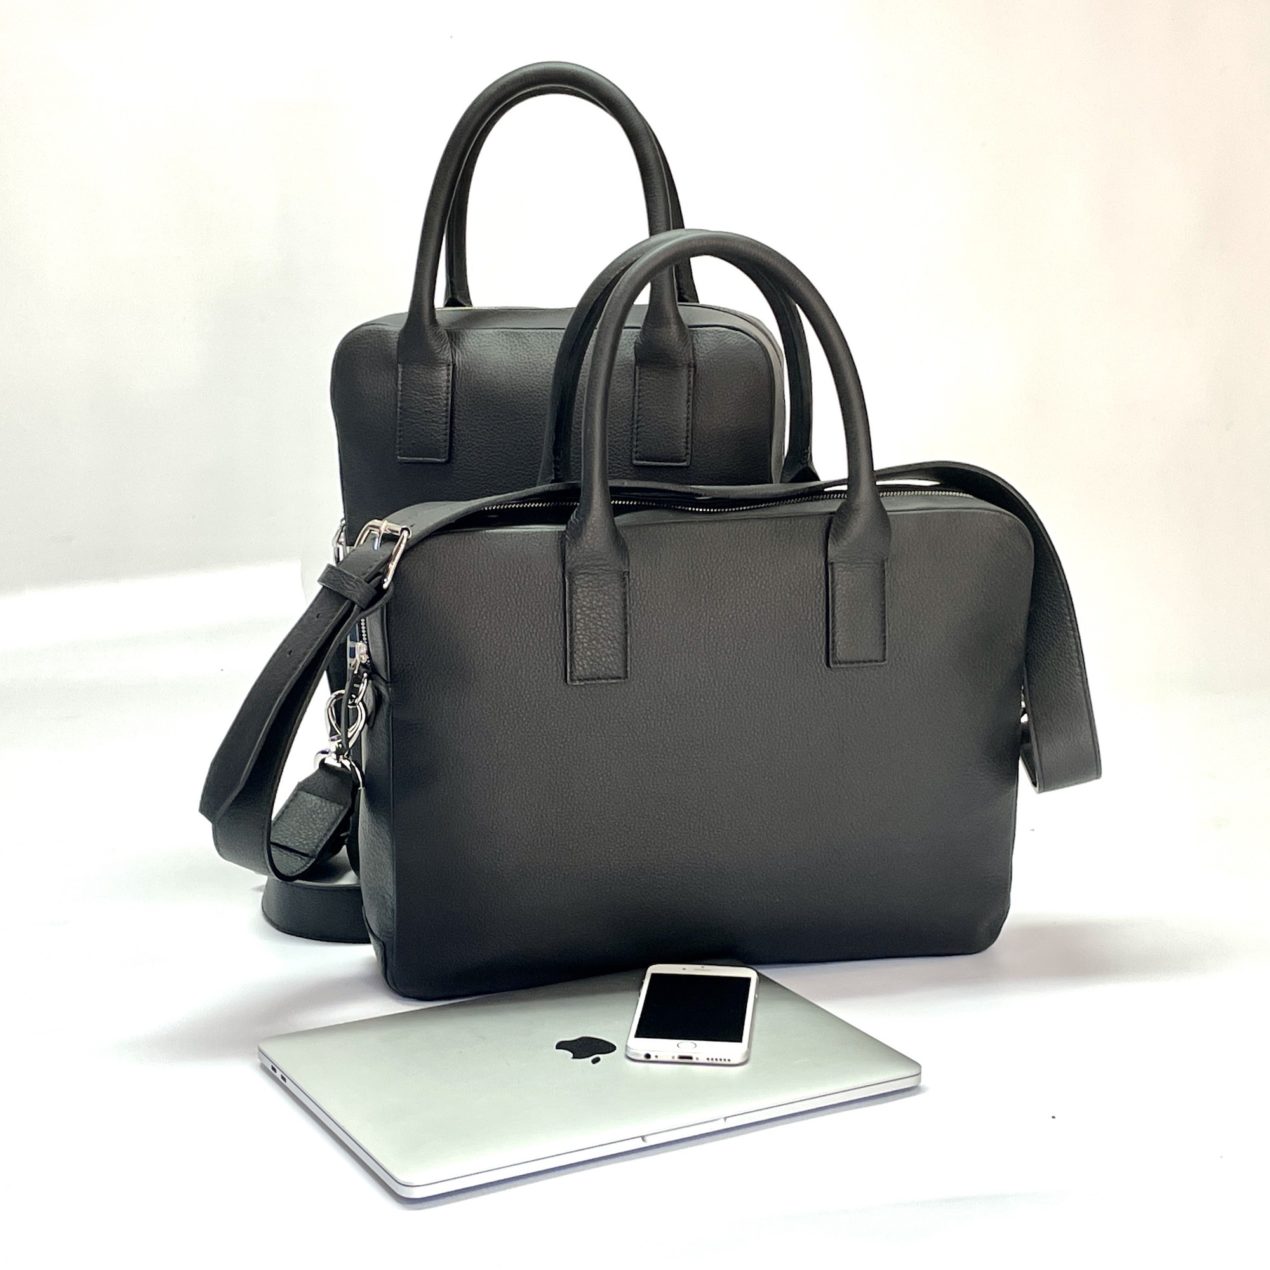 Business bag laptop 13" 16" tablet 8" 10 " with shoulder strap, a patch pocket with a zip closure, and storage space for 1 or 2 pens, your mobile phone, business or credit card. and handle loop for carry-on